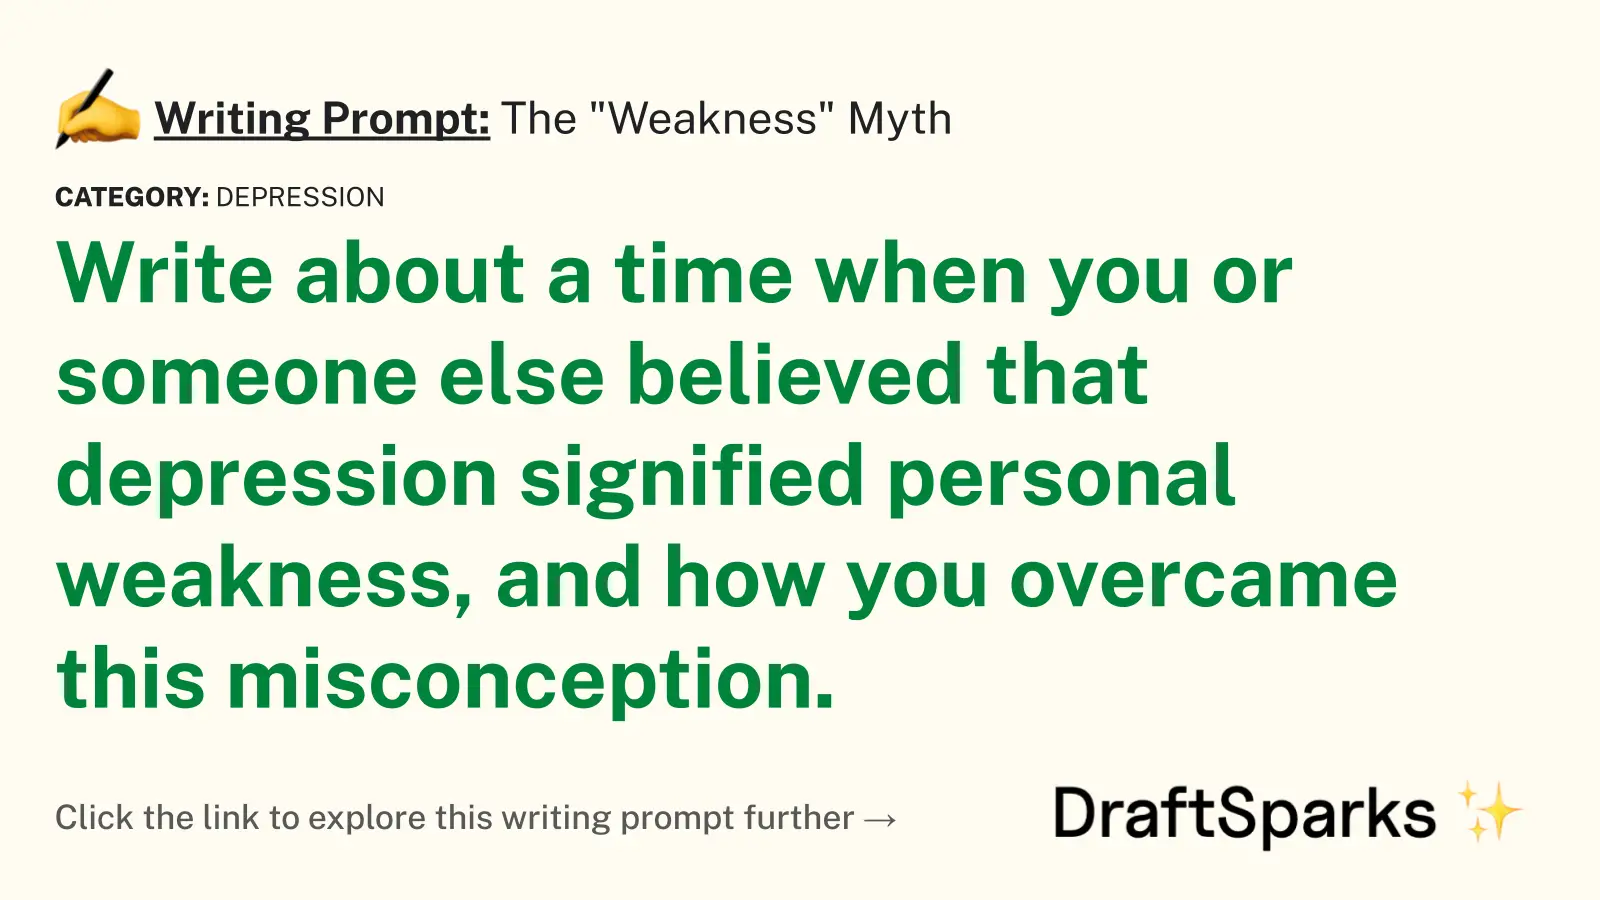 The “Weakness” Myth